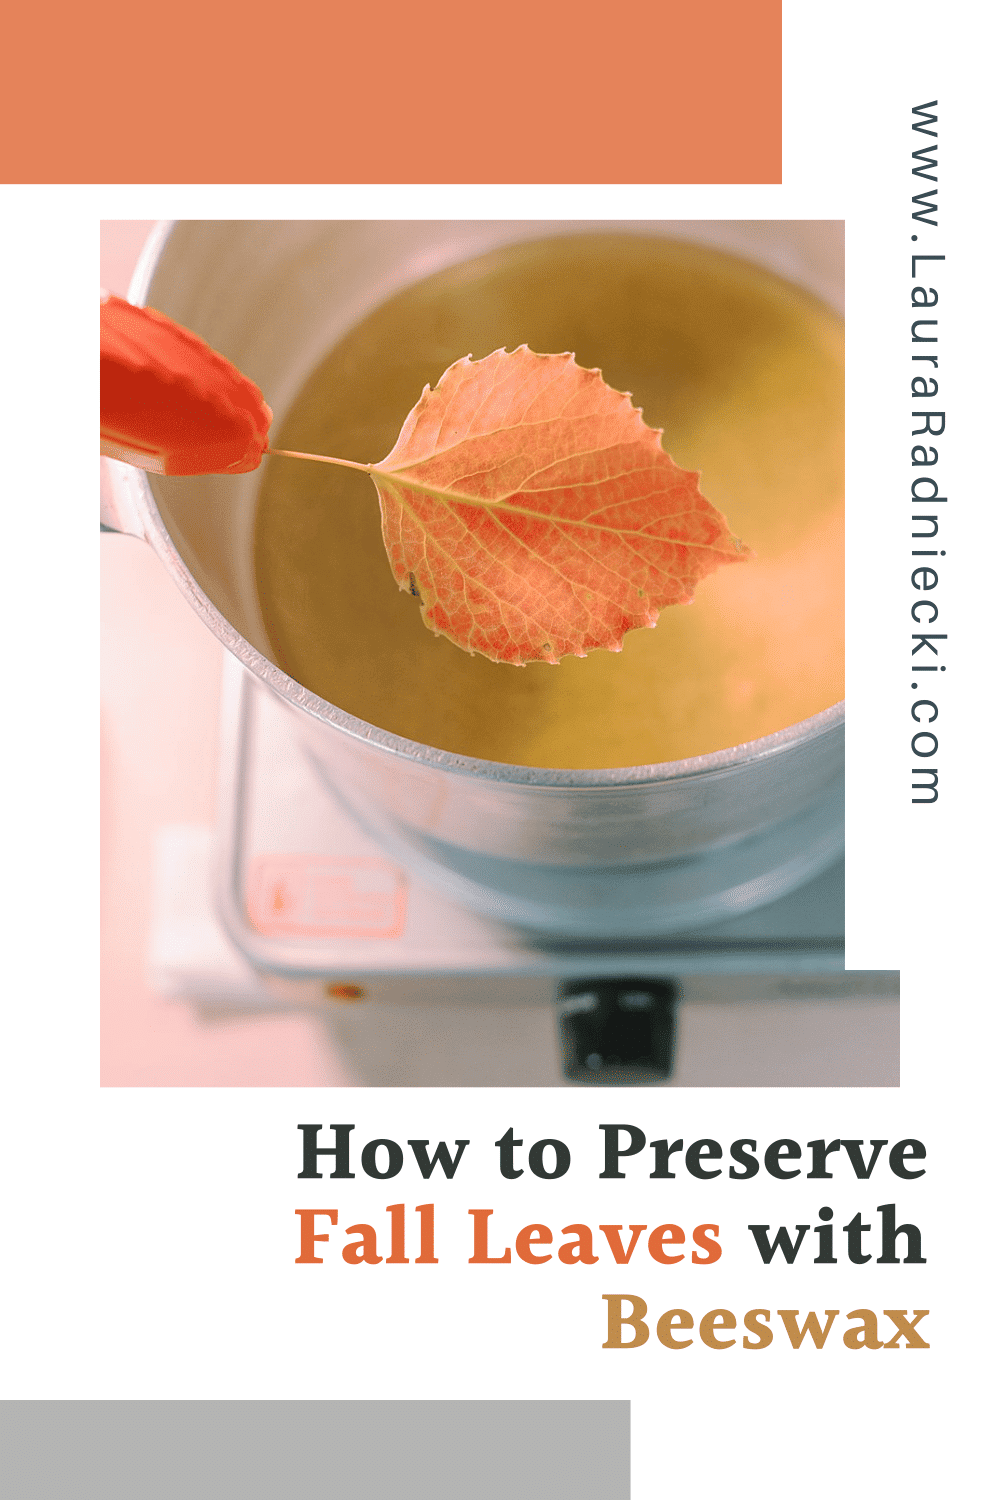 How to Preserve Fall Leaves with Beeswax